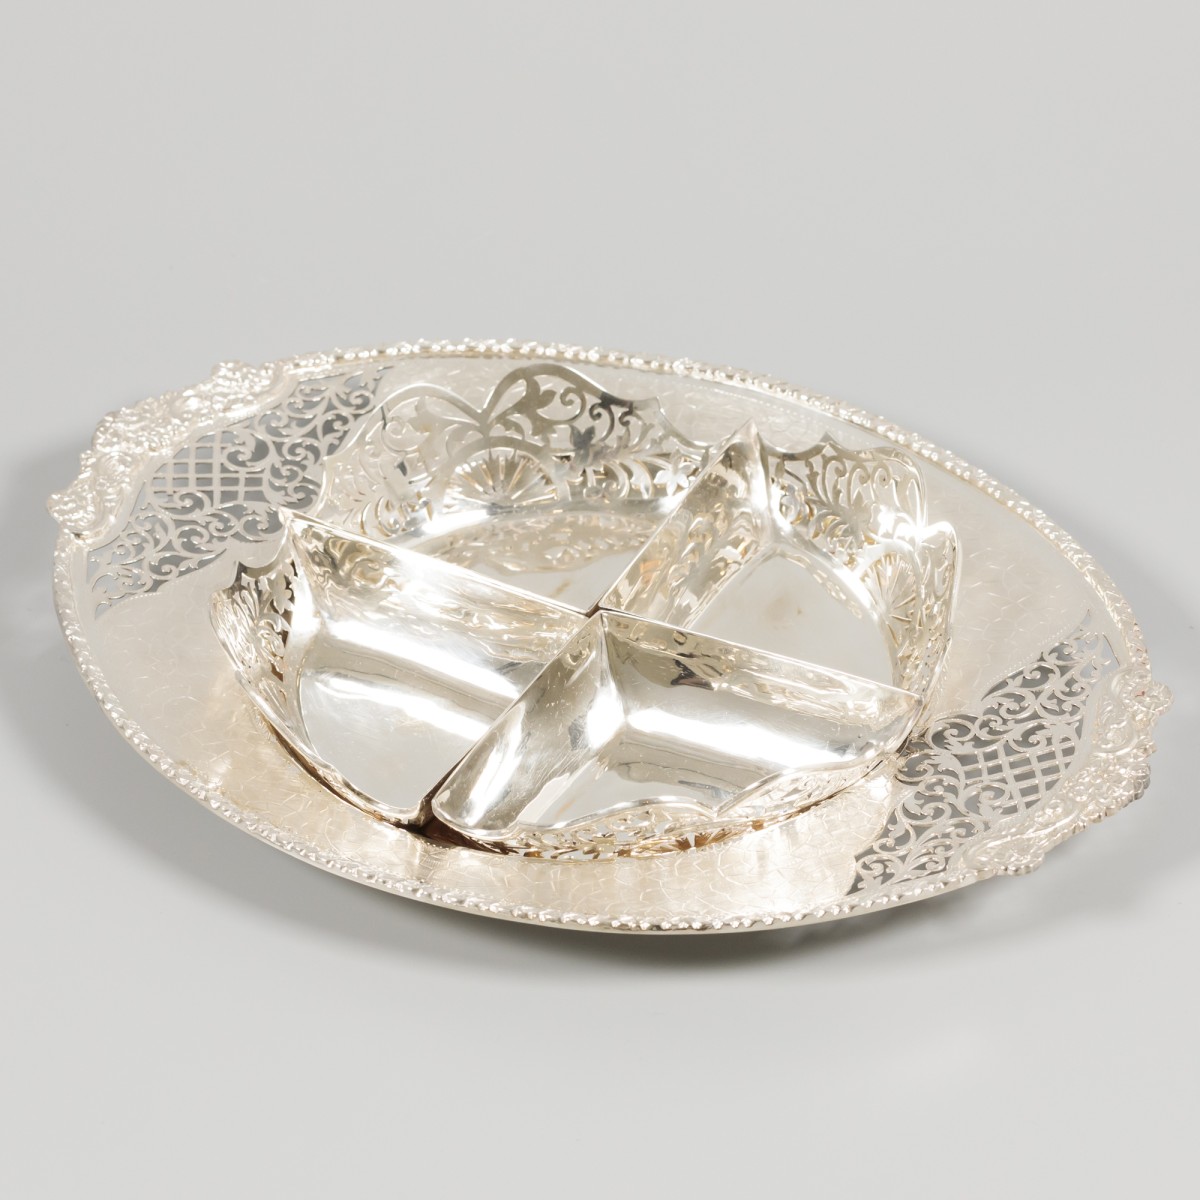 Serving bowl silver. - Image 4 of 7